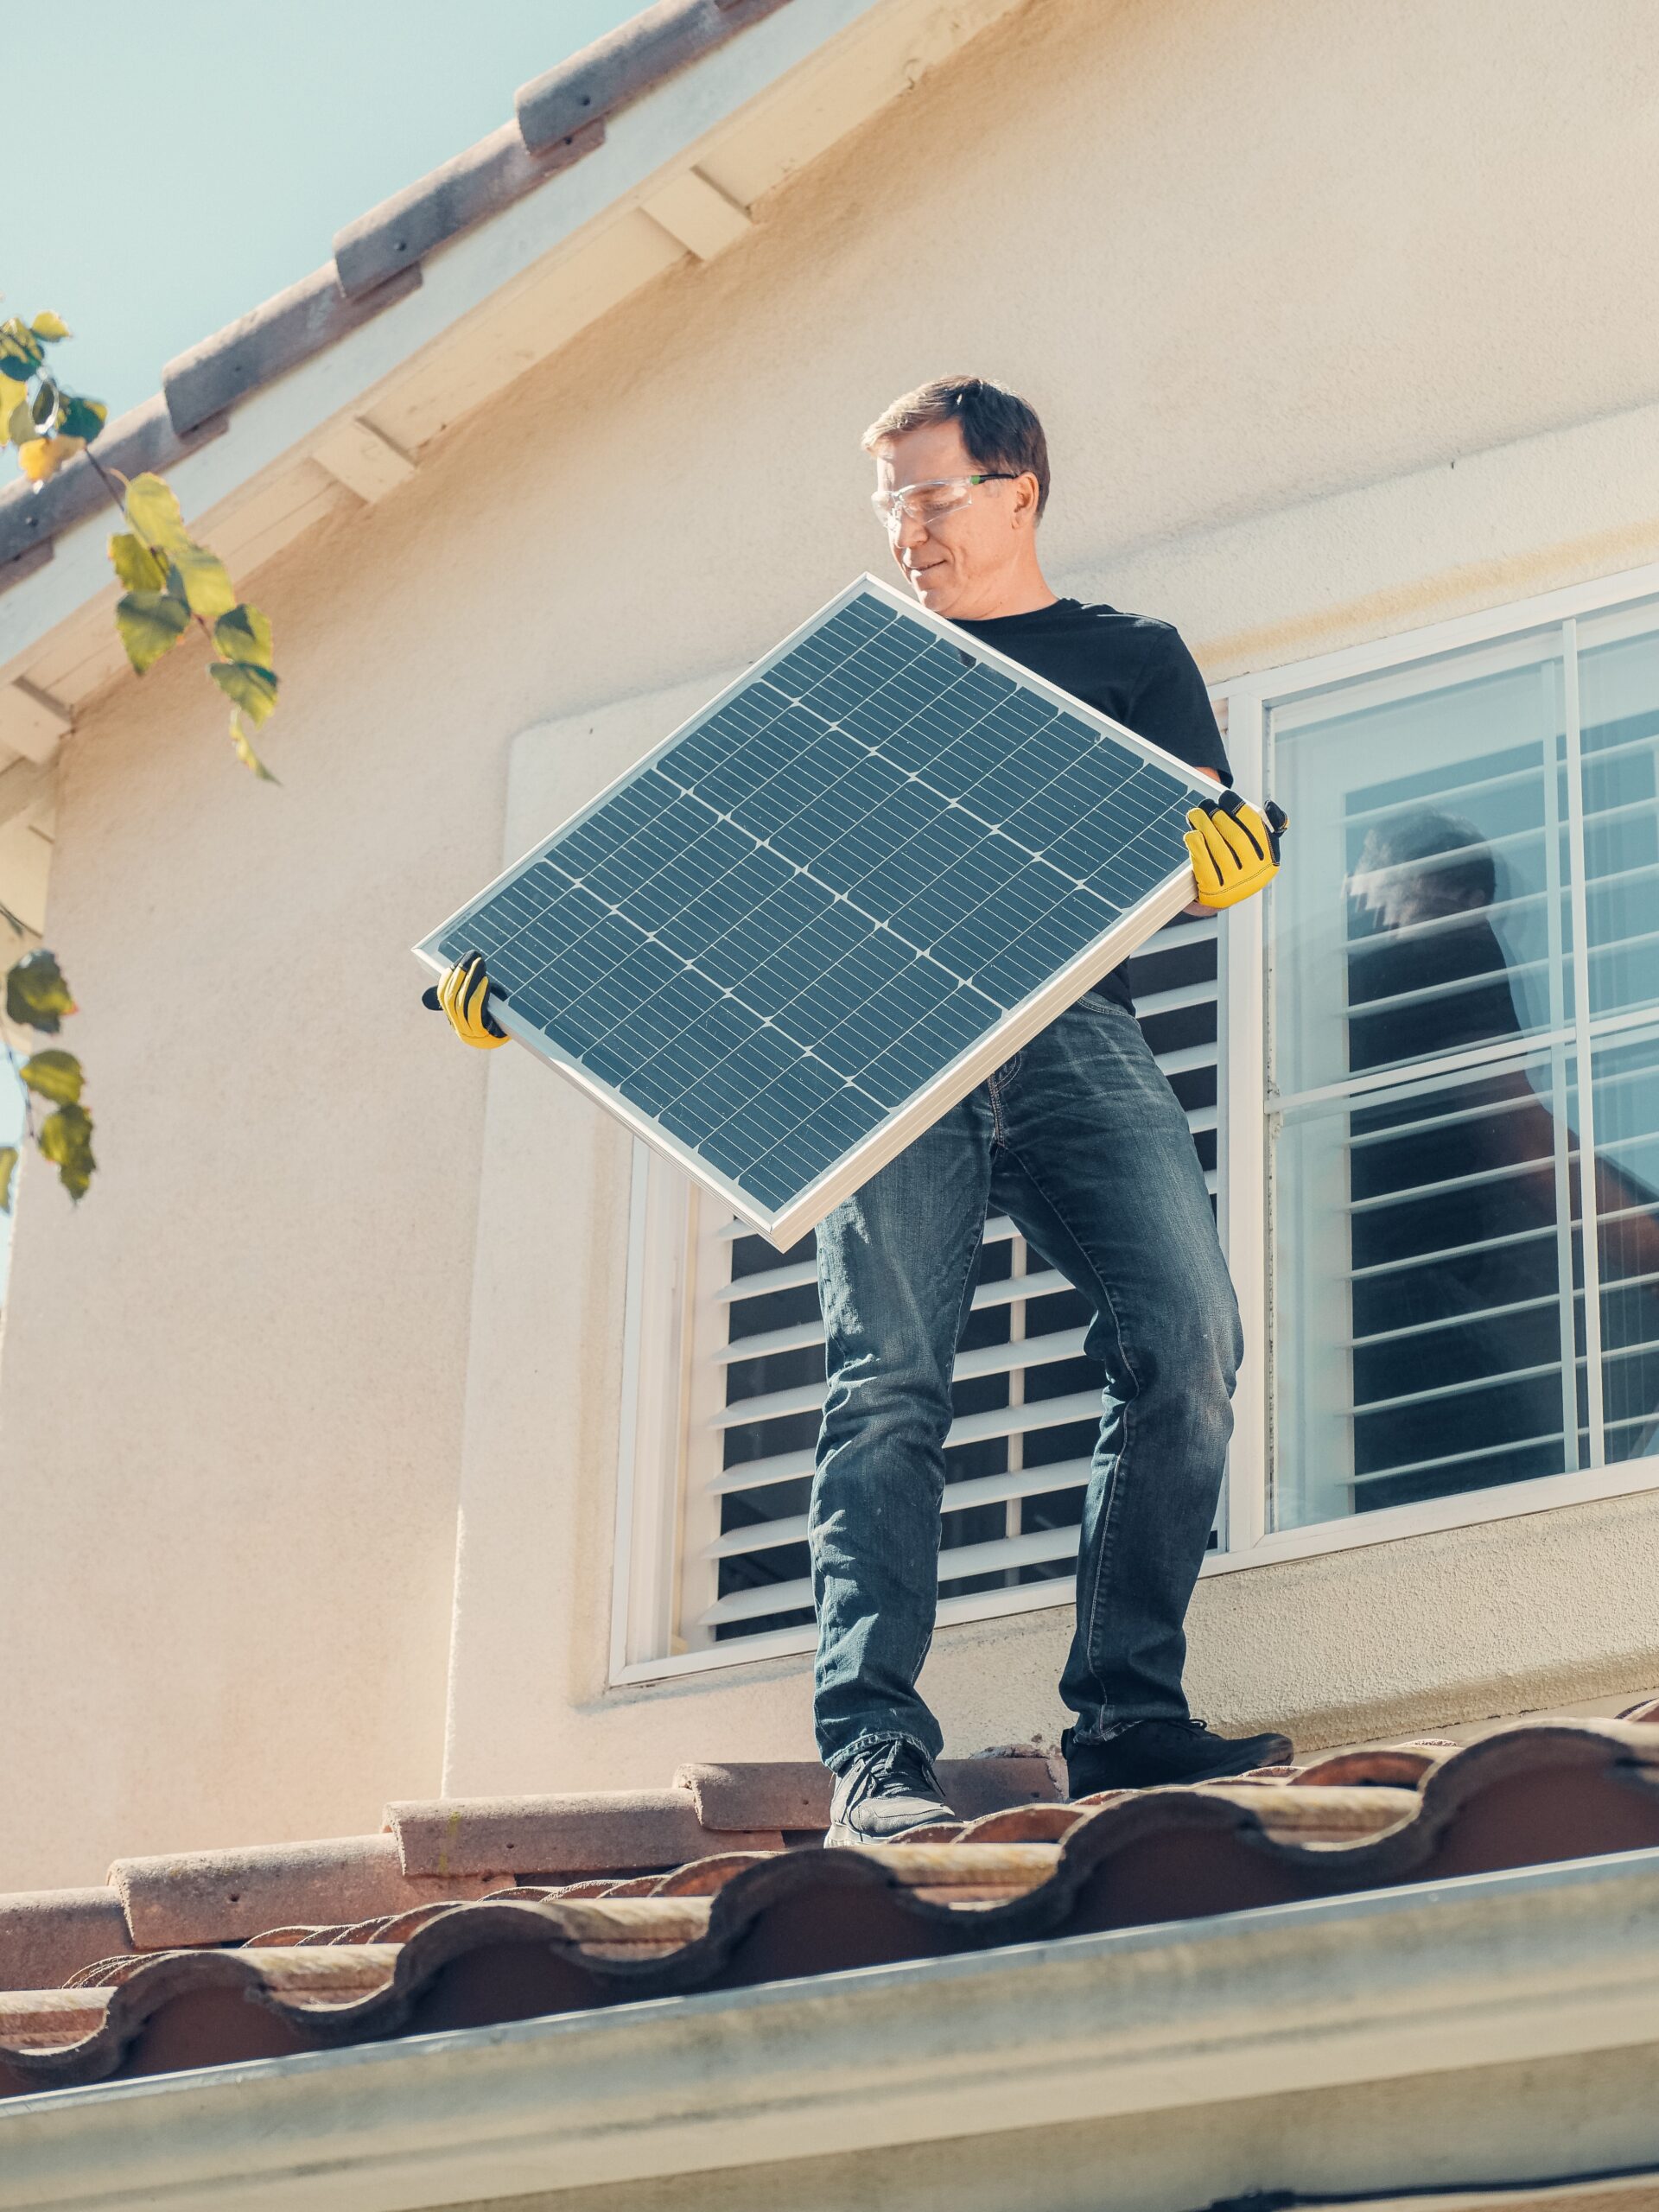 Barclays pilots Greener Home Reward to support energy efficiency-related home improvements